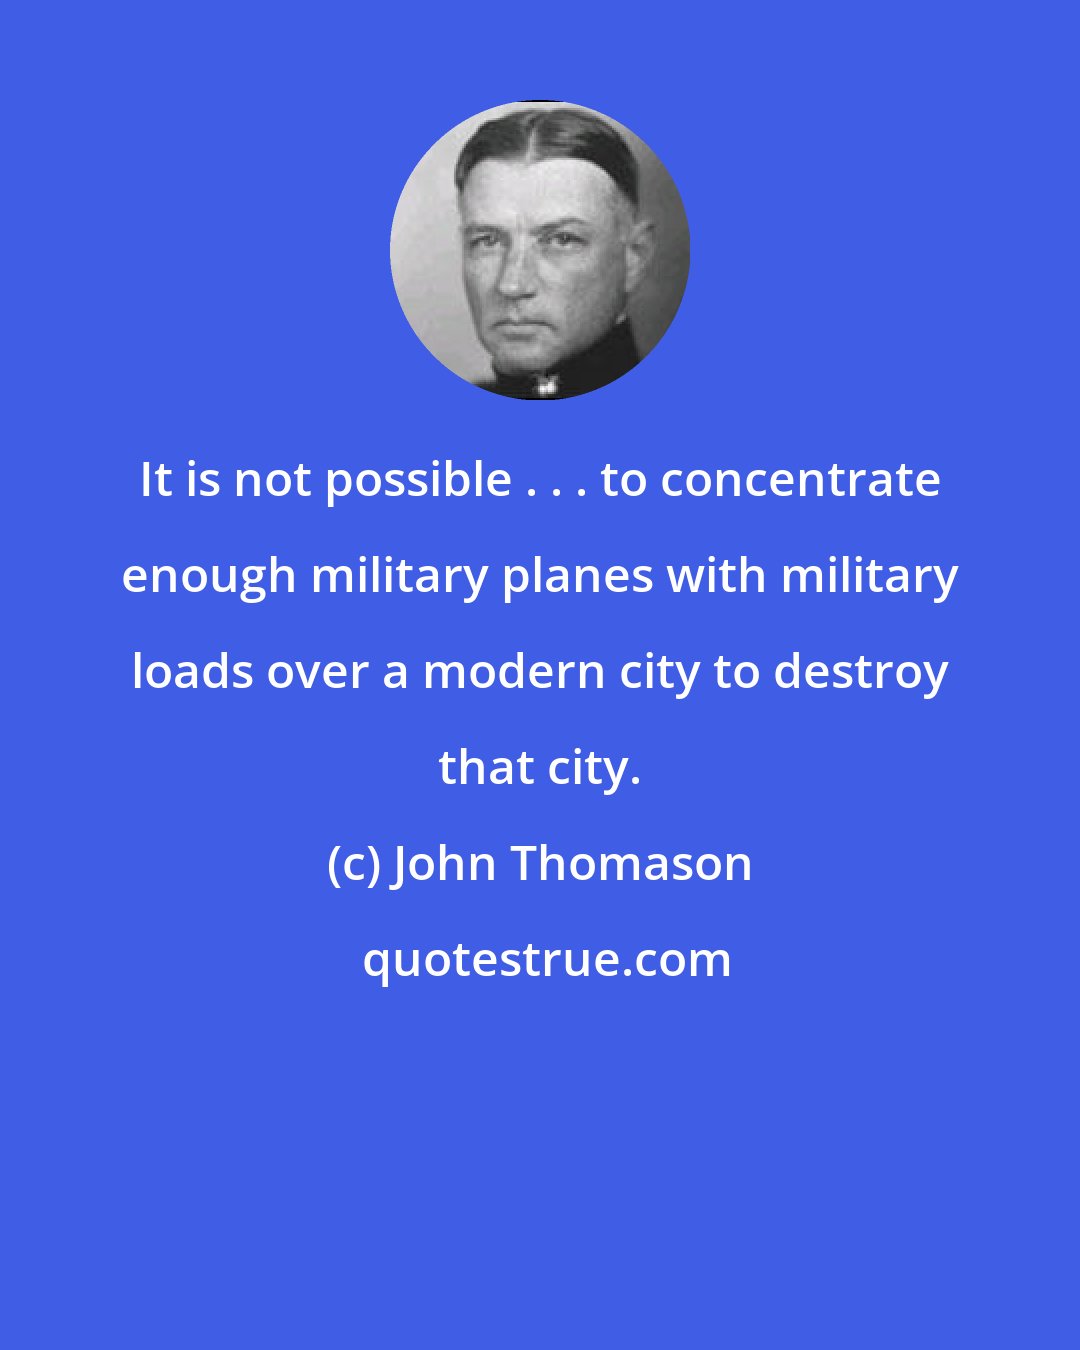 John Thomason: It is not possible . . . to concentrate enough military planes with military loads over a modern city to destroy that city.